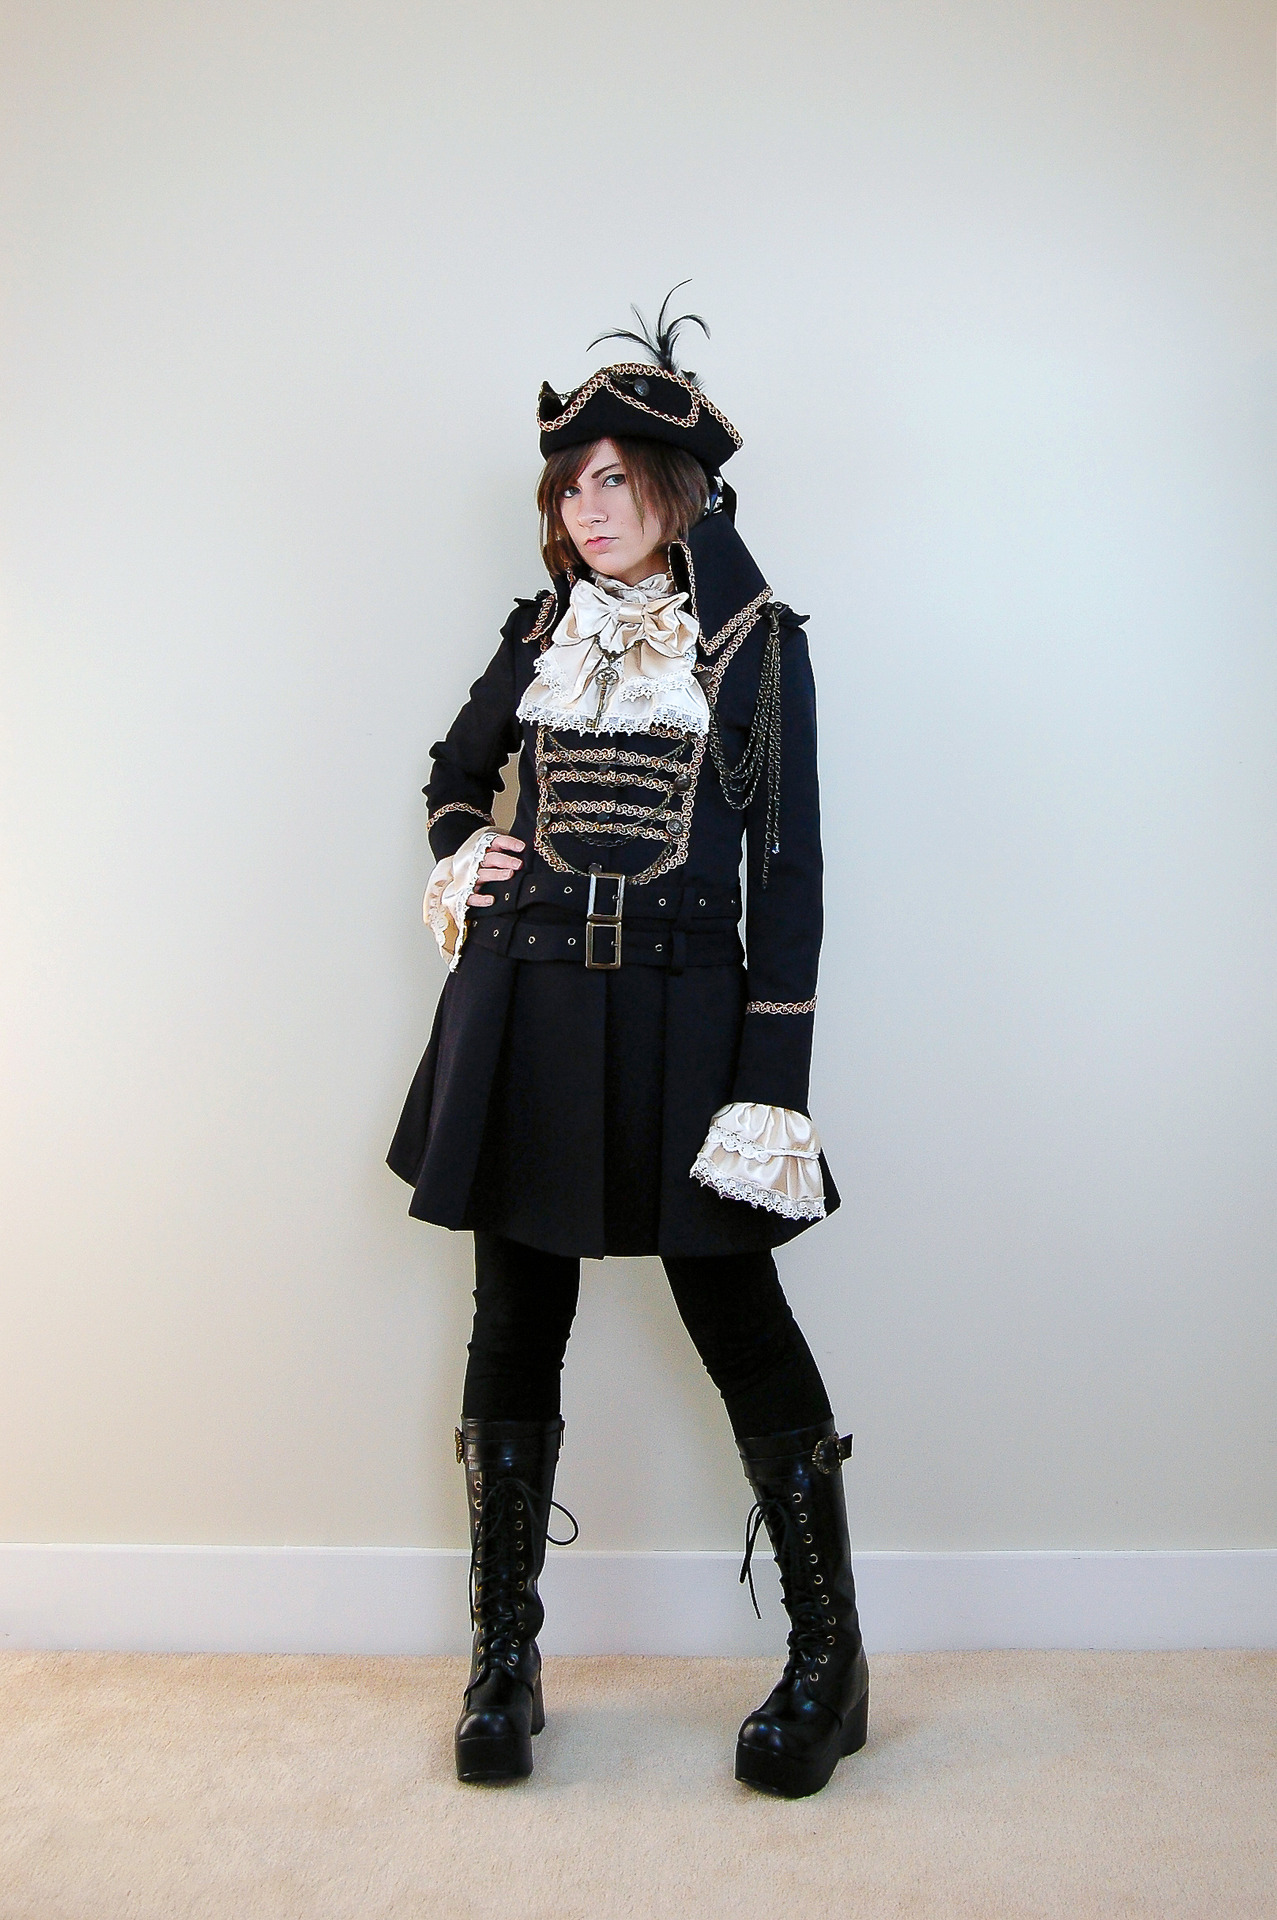 Pirate ouji with my Crimson Jack jacket! Hat, jacket, blouse, boots